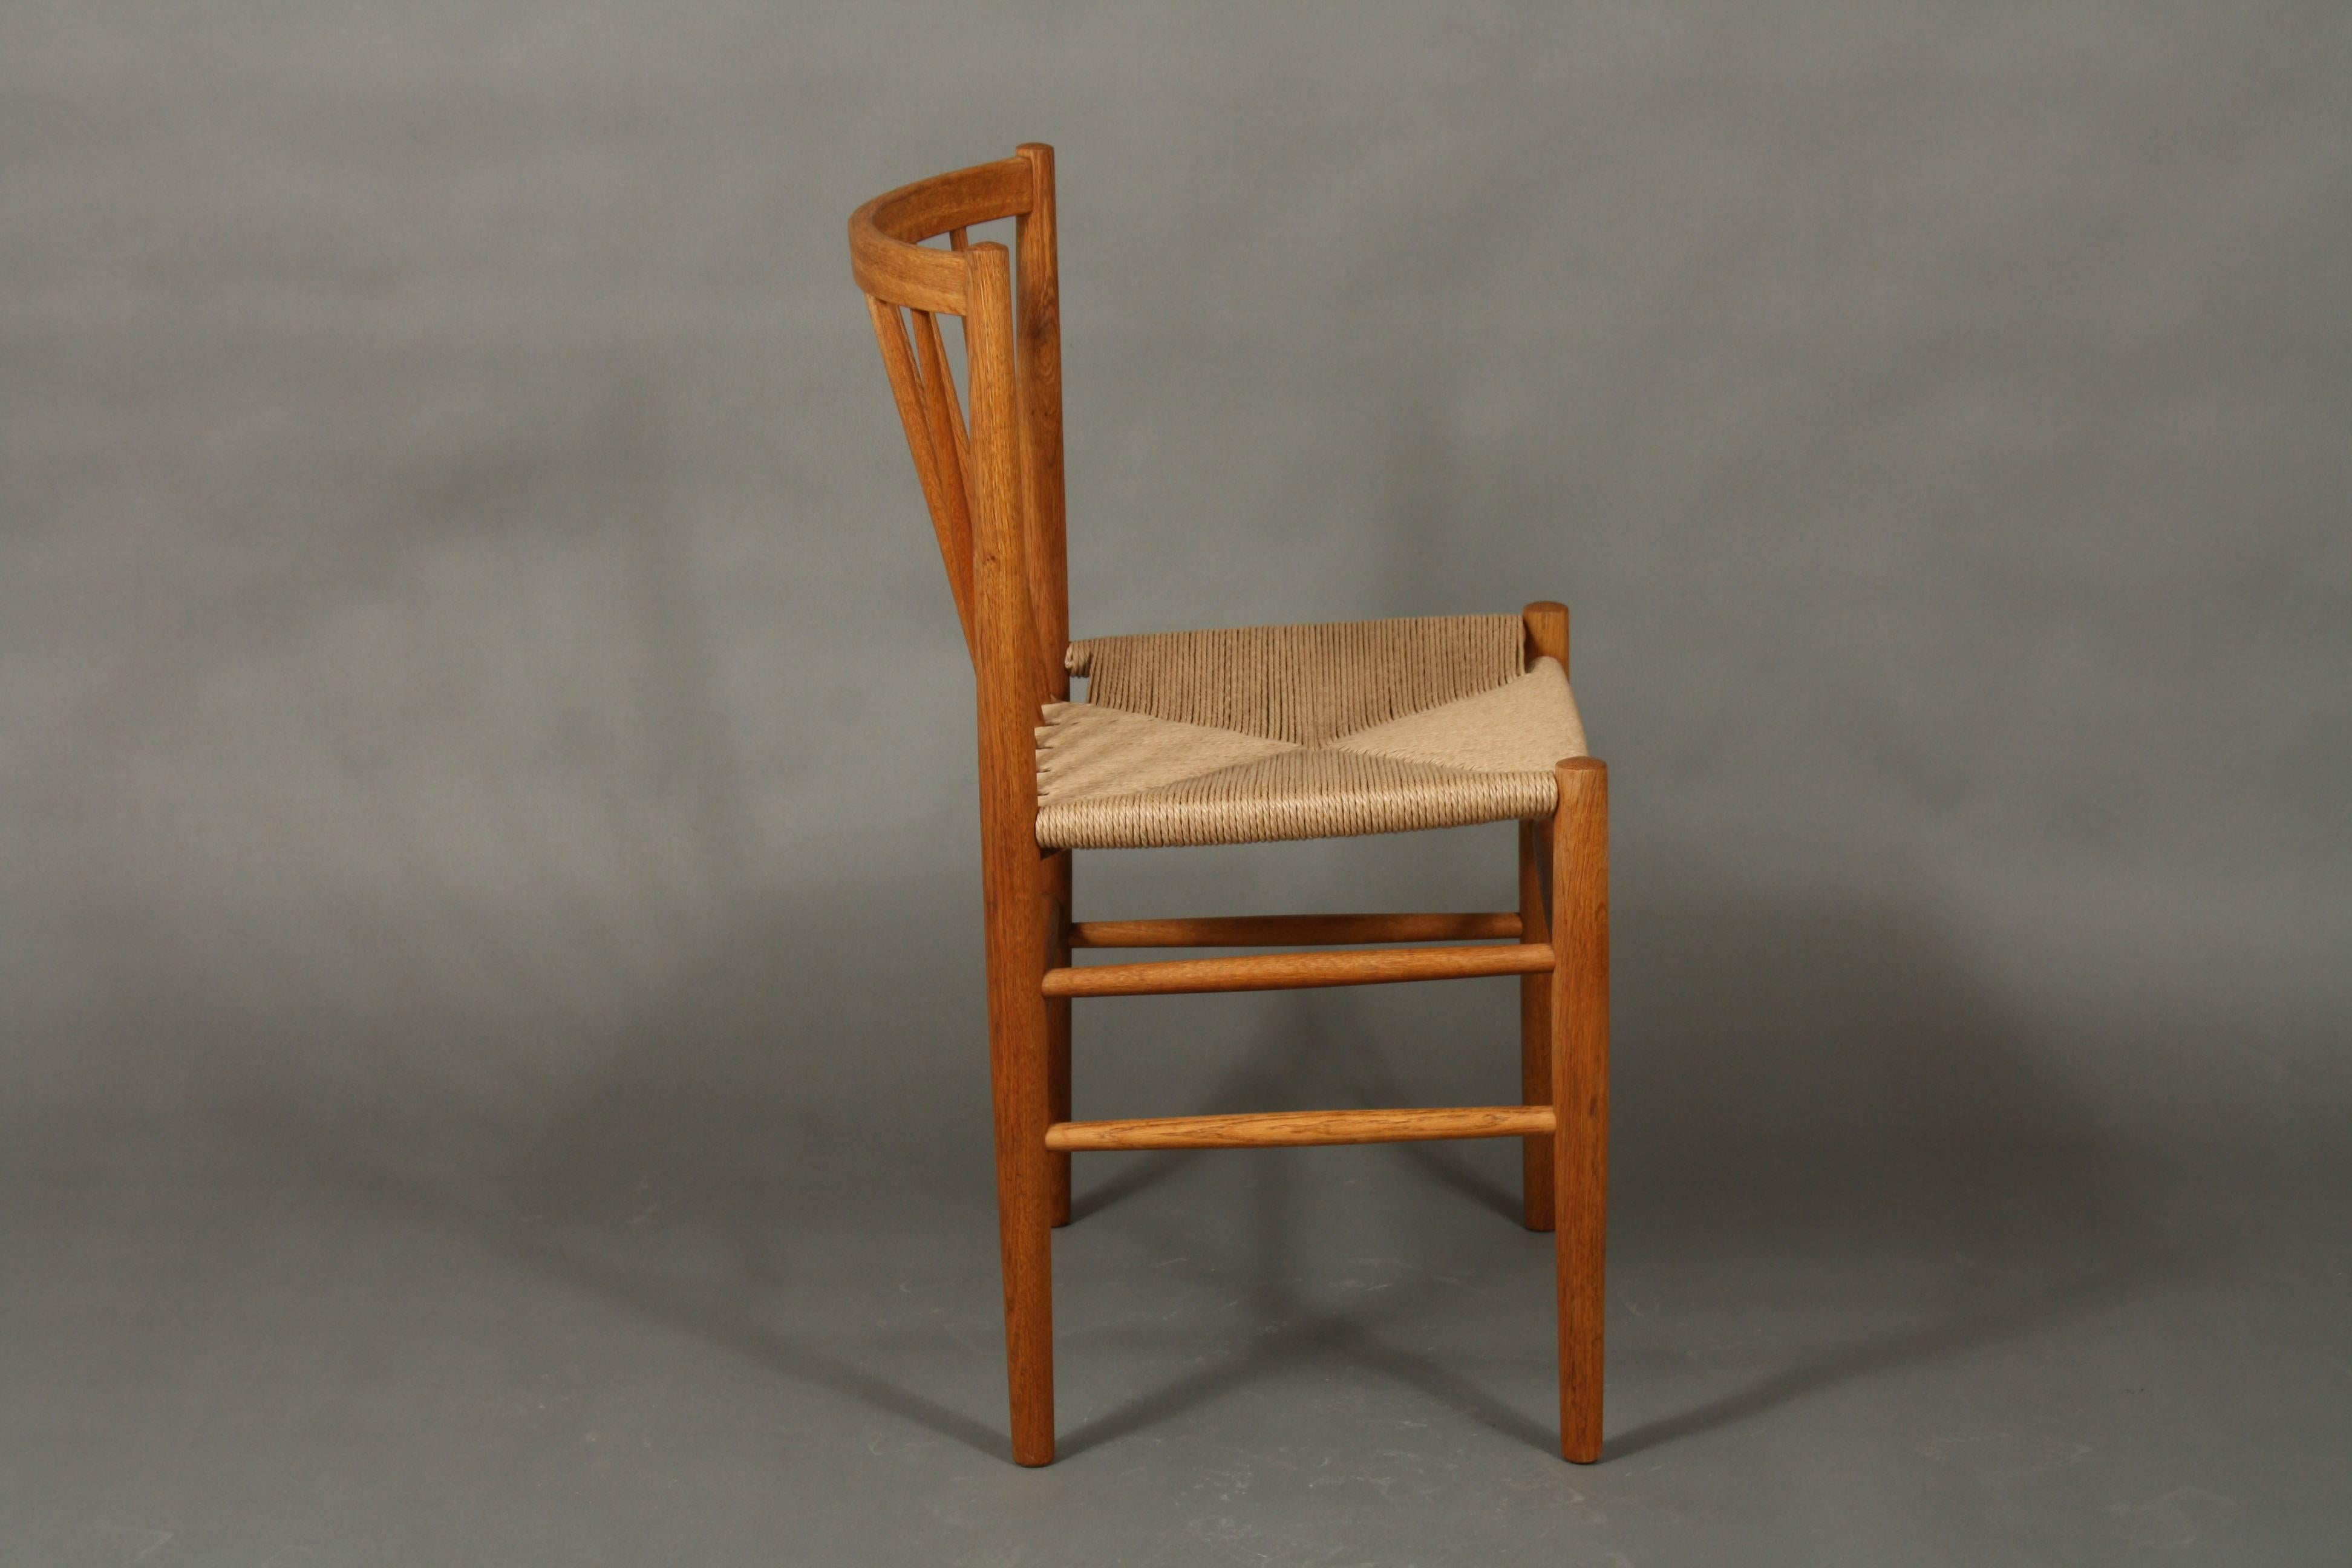 Mid-Century Jørgen Bækmark dining chairs, model J80 in oak and paper cord. The chairs are restored with new seats in paper cord. The model was designed in the 1950s and is very comfortable.